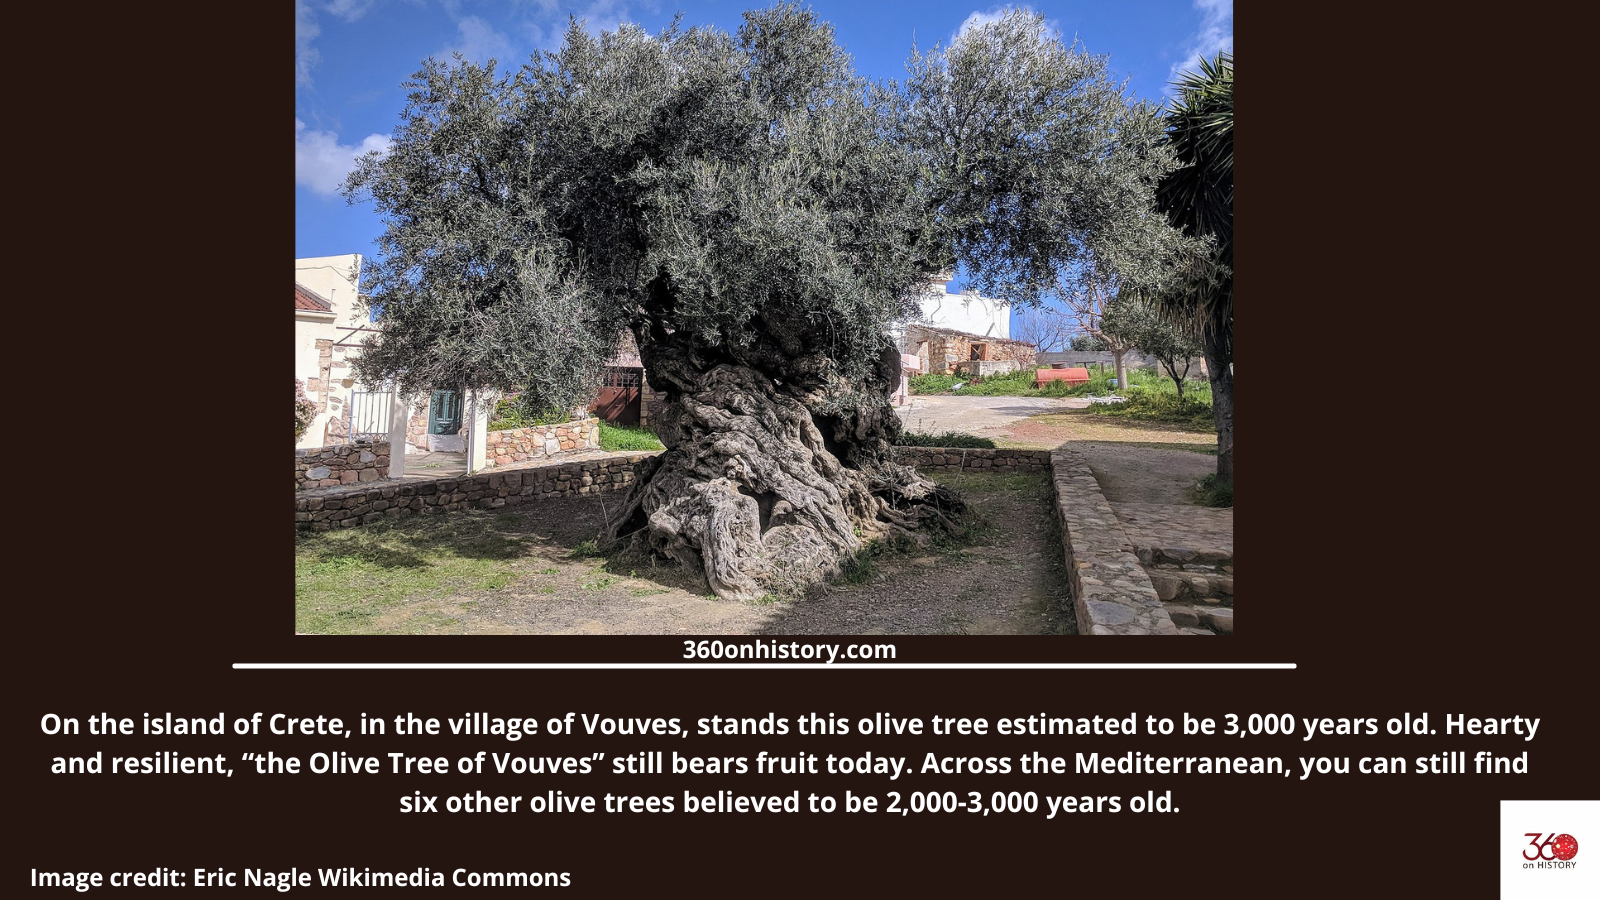 On the island of Crete, in the village of Vouves, stands an olive tree estimated to be 3,000 years old. Hearty and resilient, “the Olive Tree of Vouves” still bears fruit today.